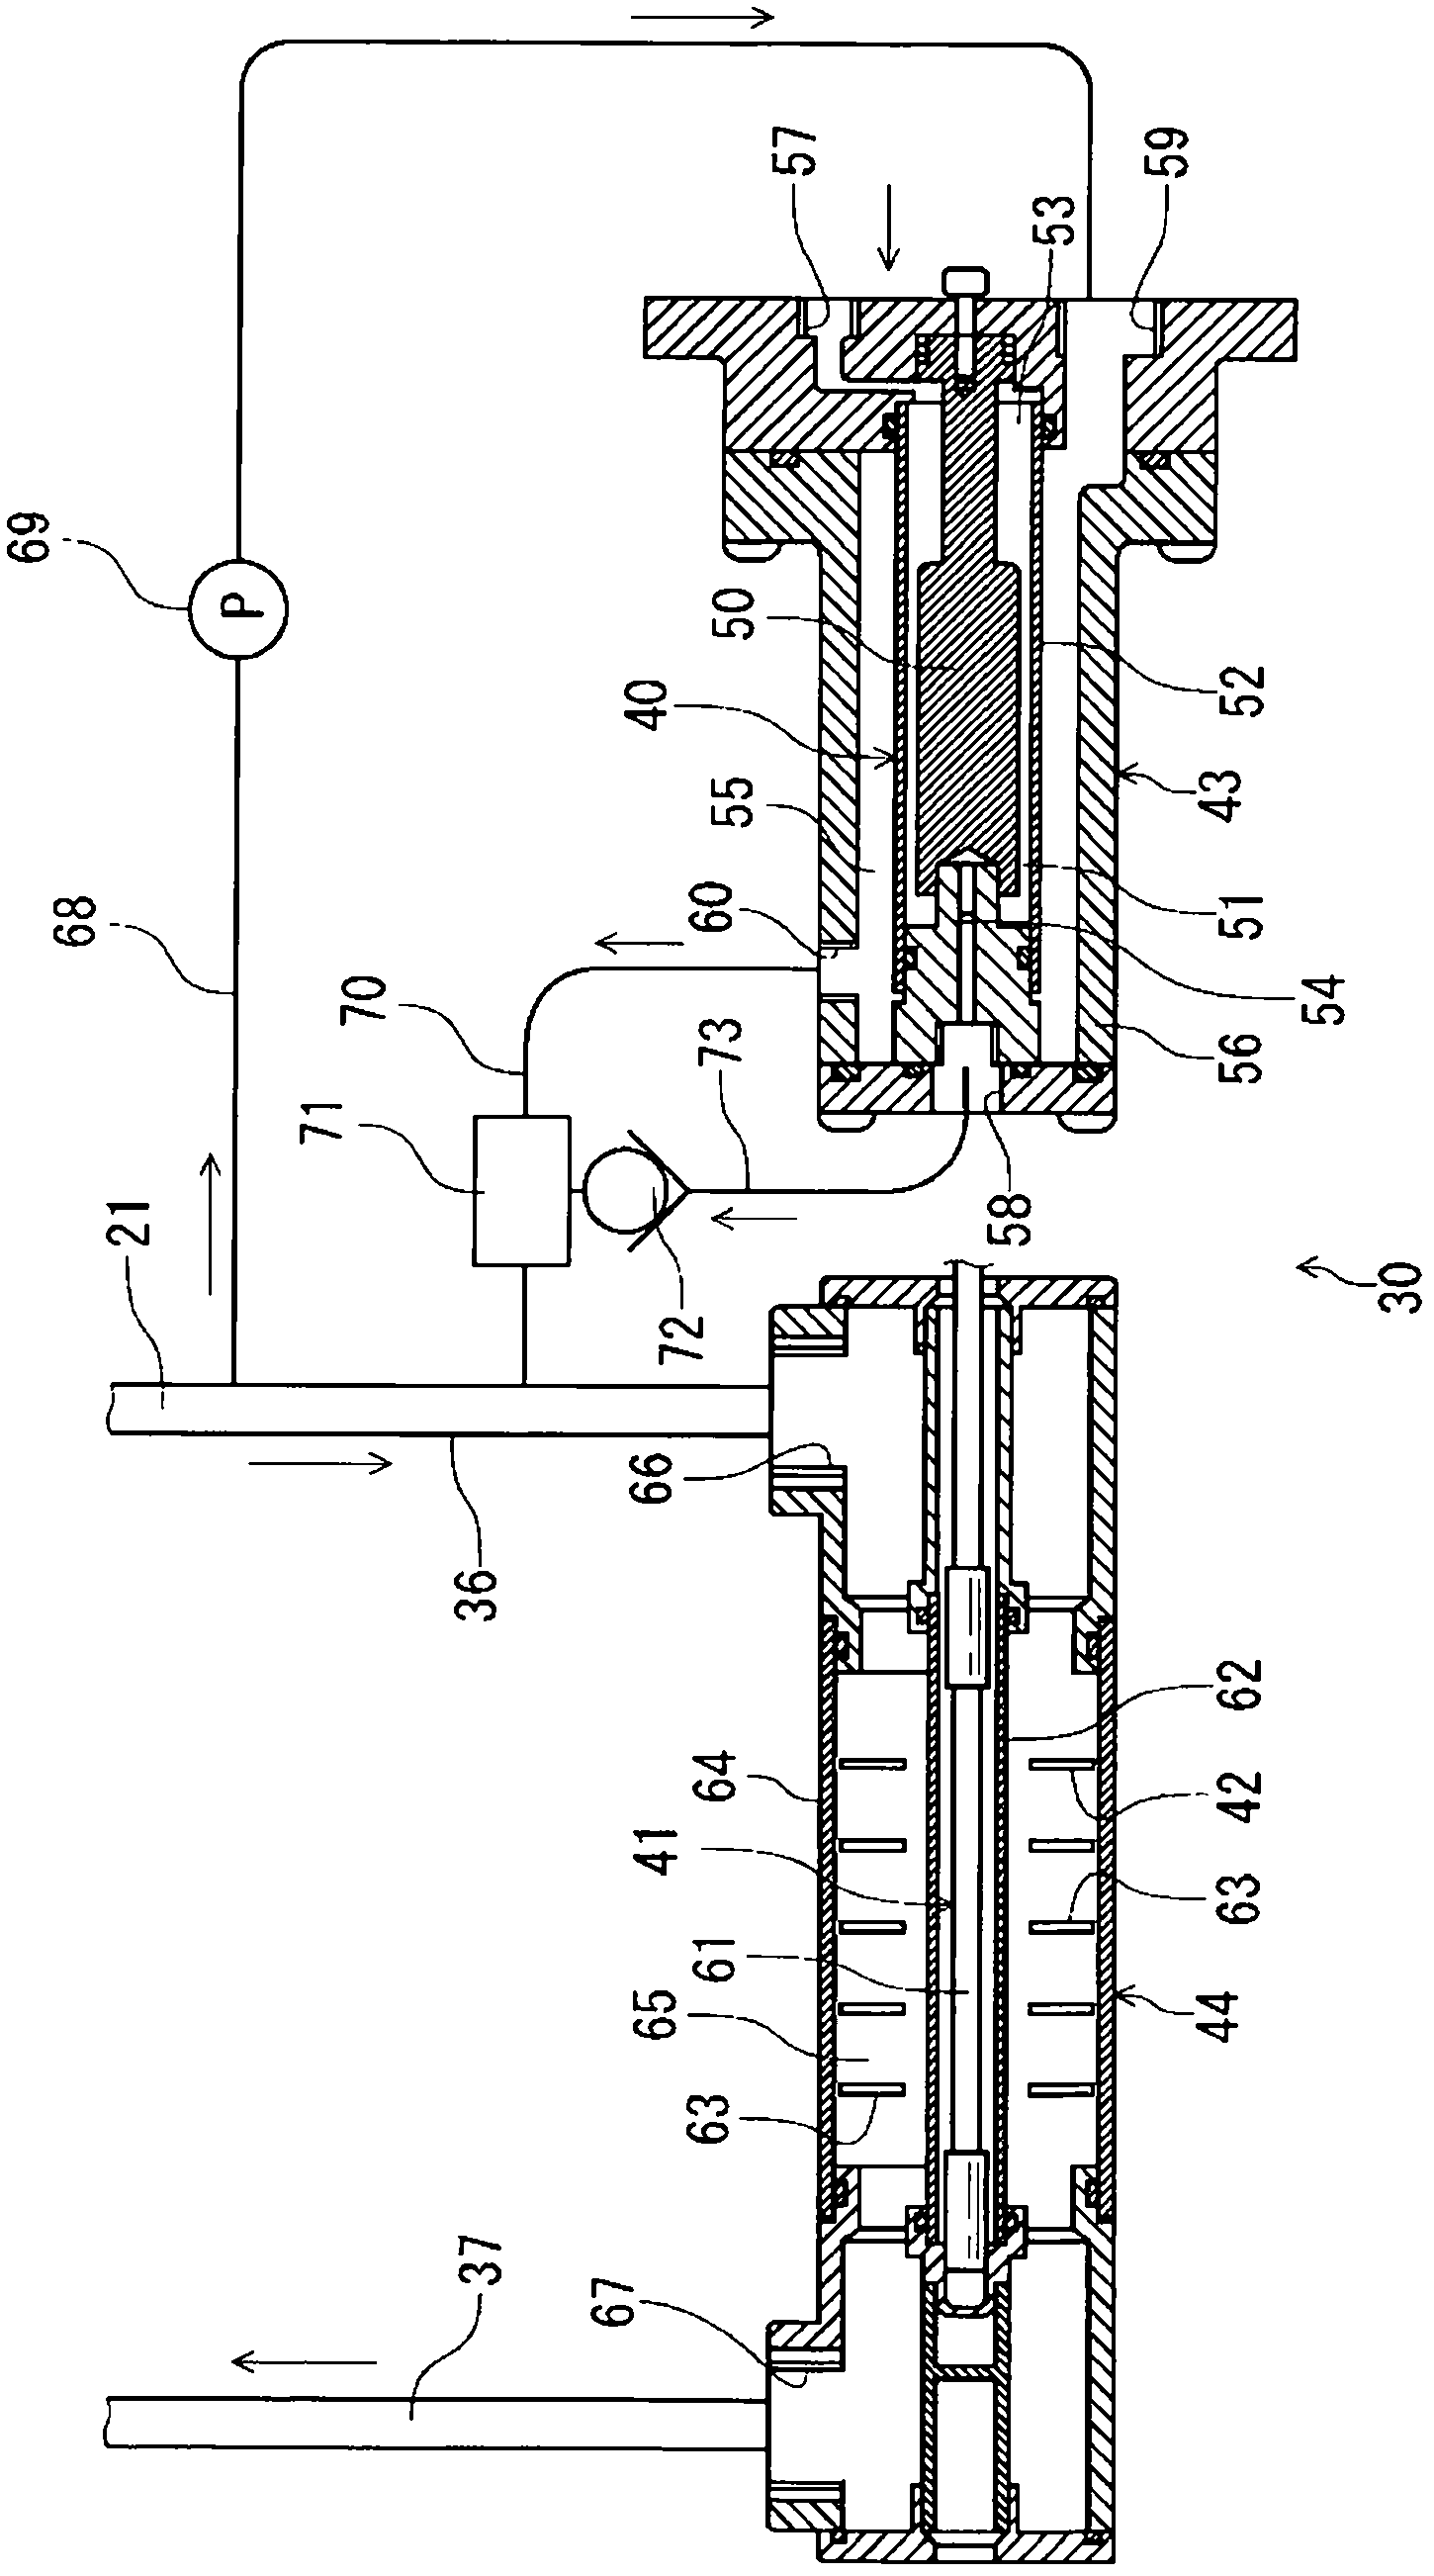 Nutriculture system, and water treatment apparatus for sterilization and purification purposes